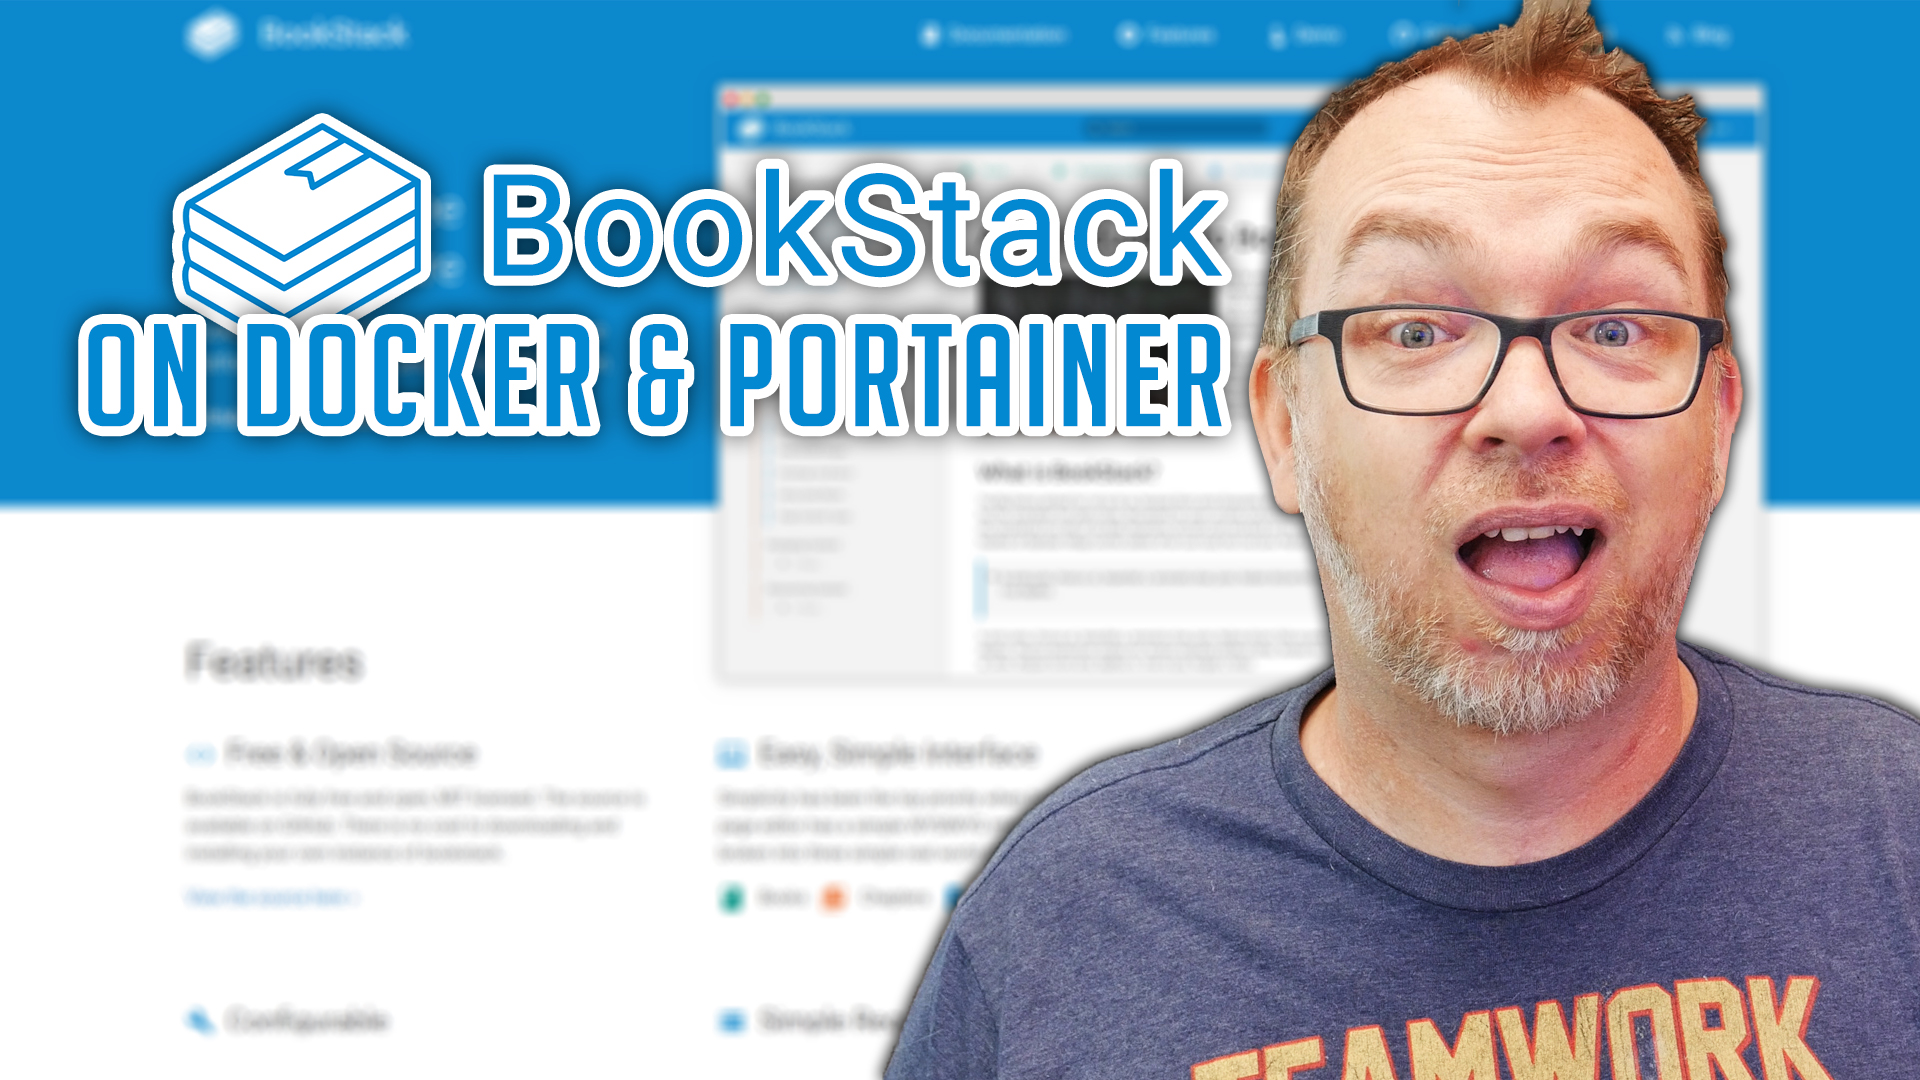 BookStack Installed on Docker and Portainer